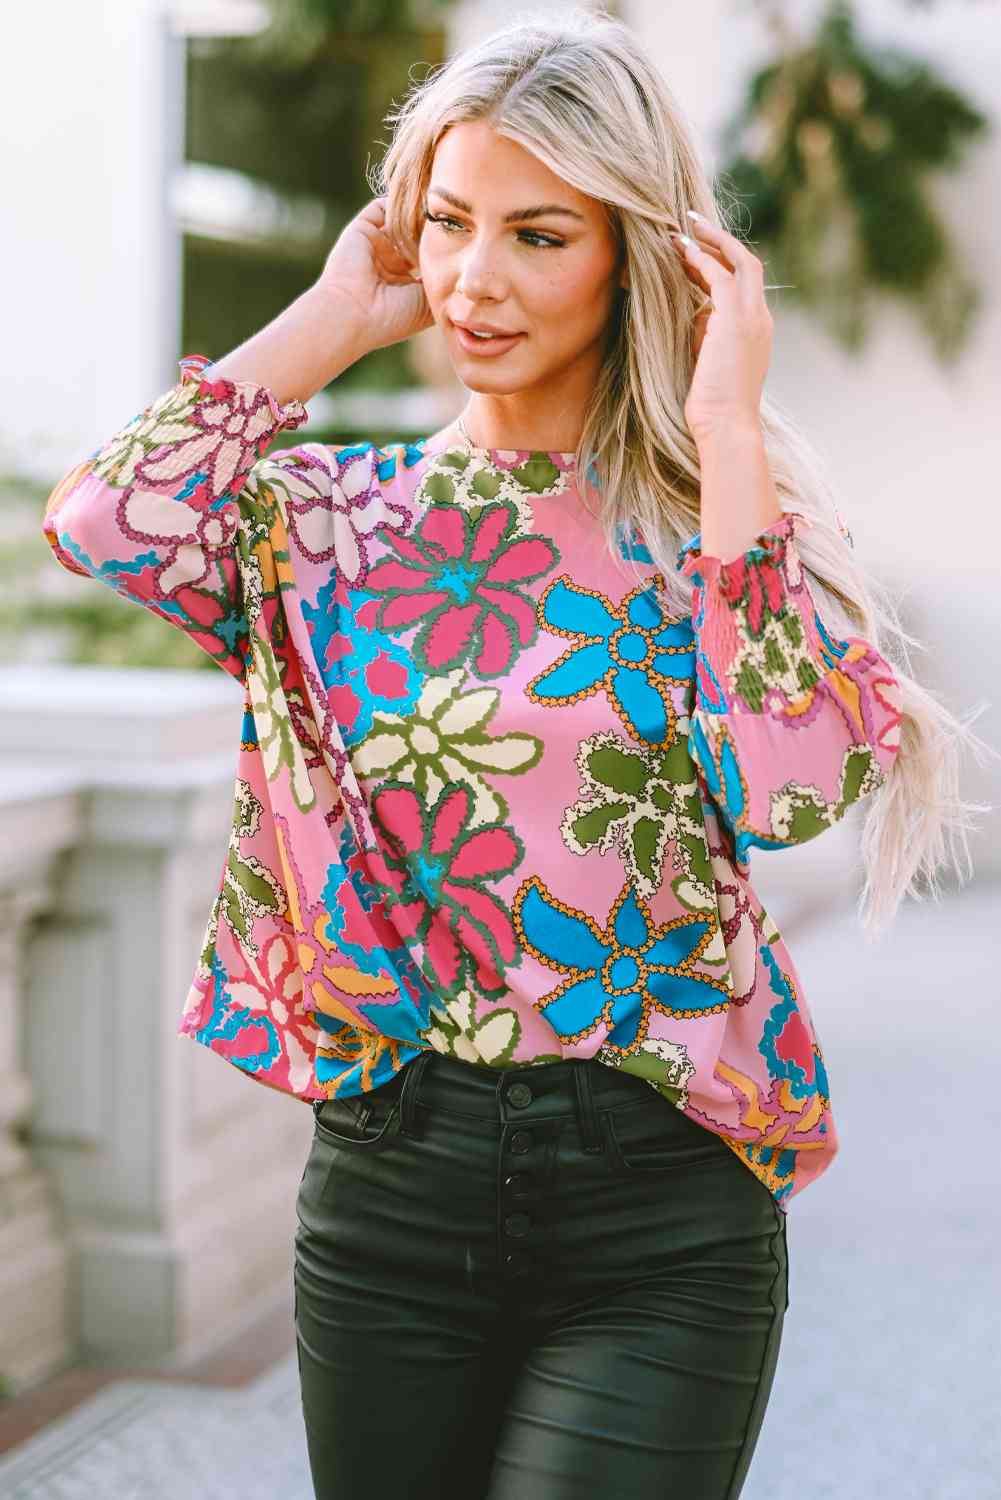 Awesome Job Floral Top